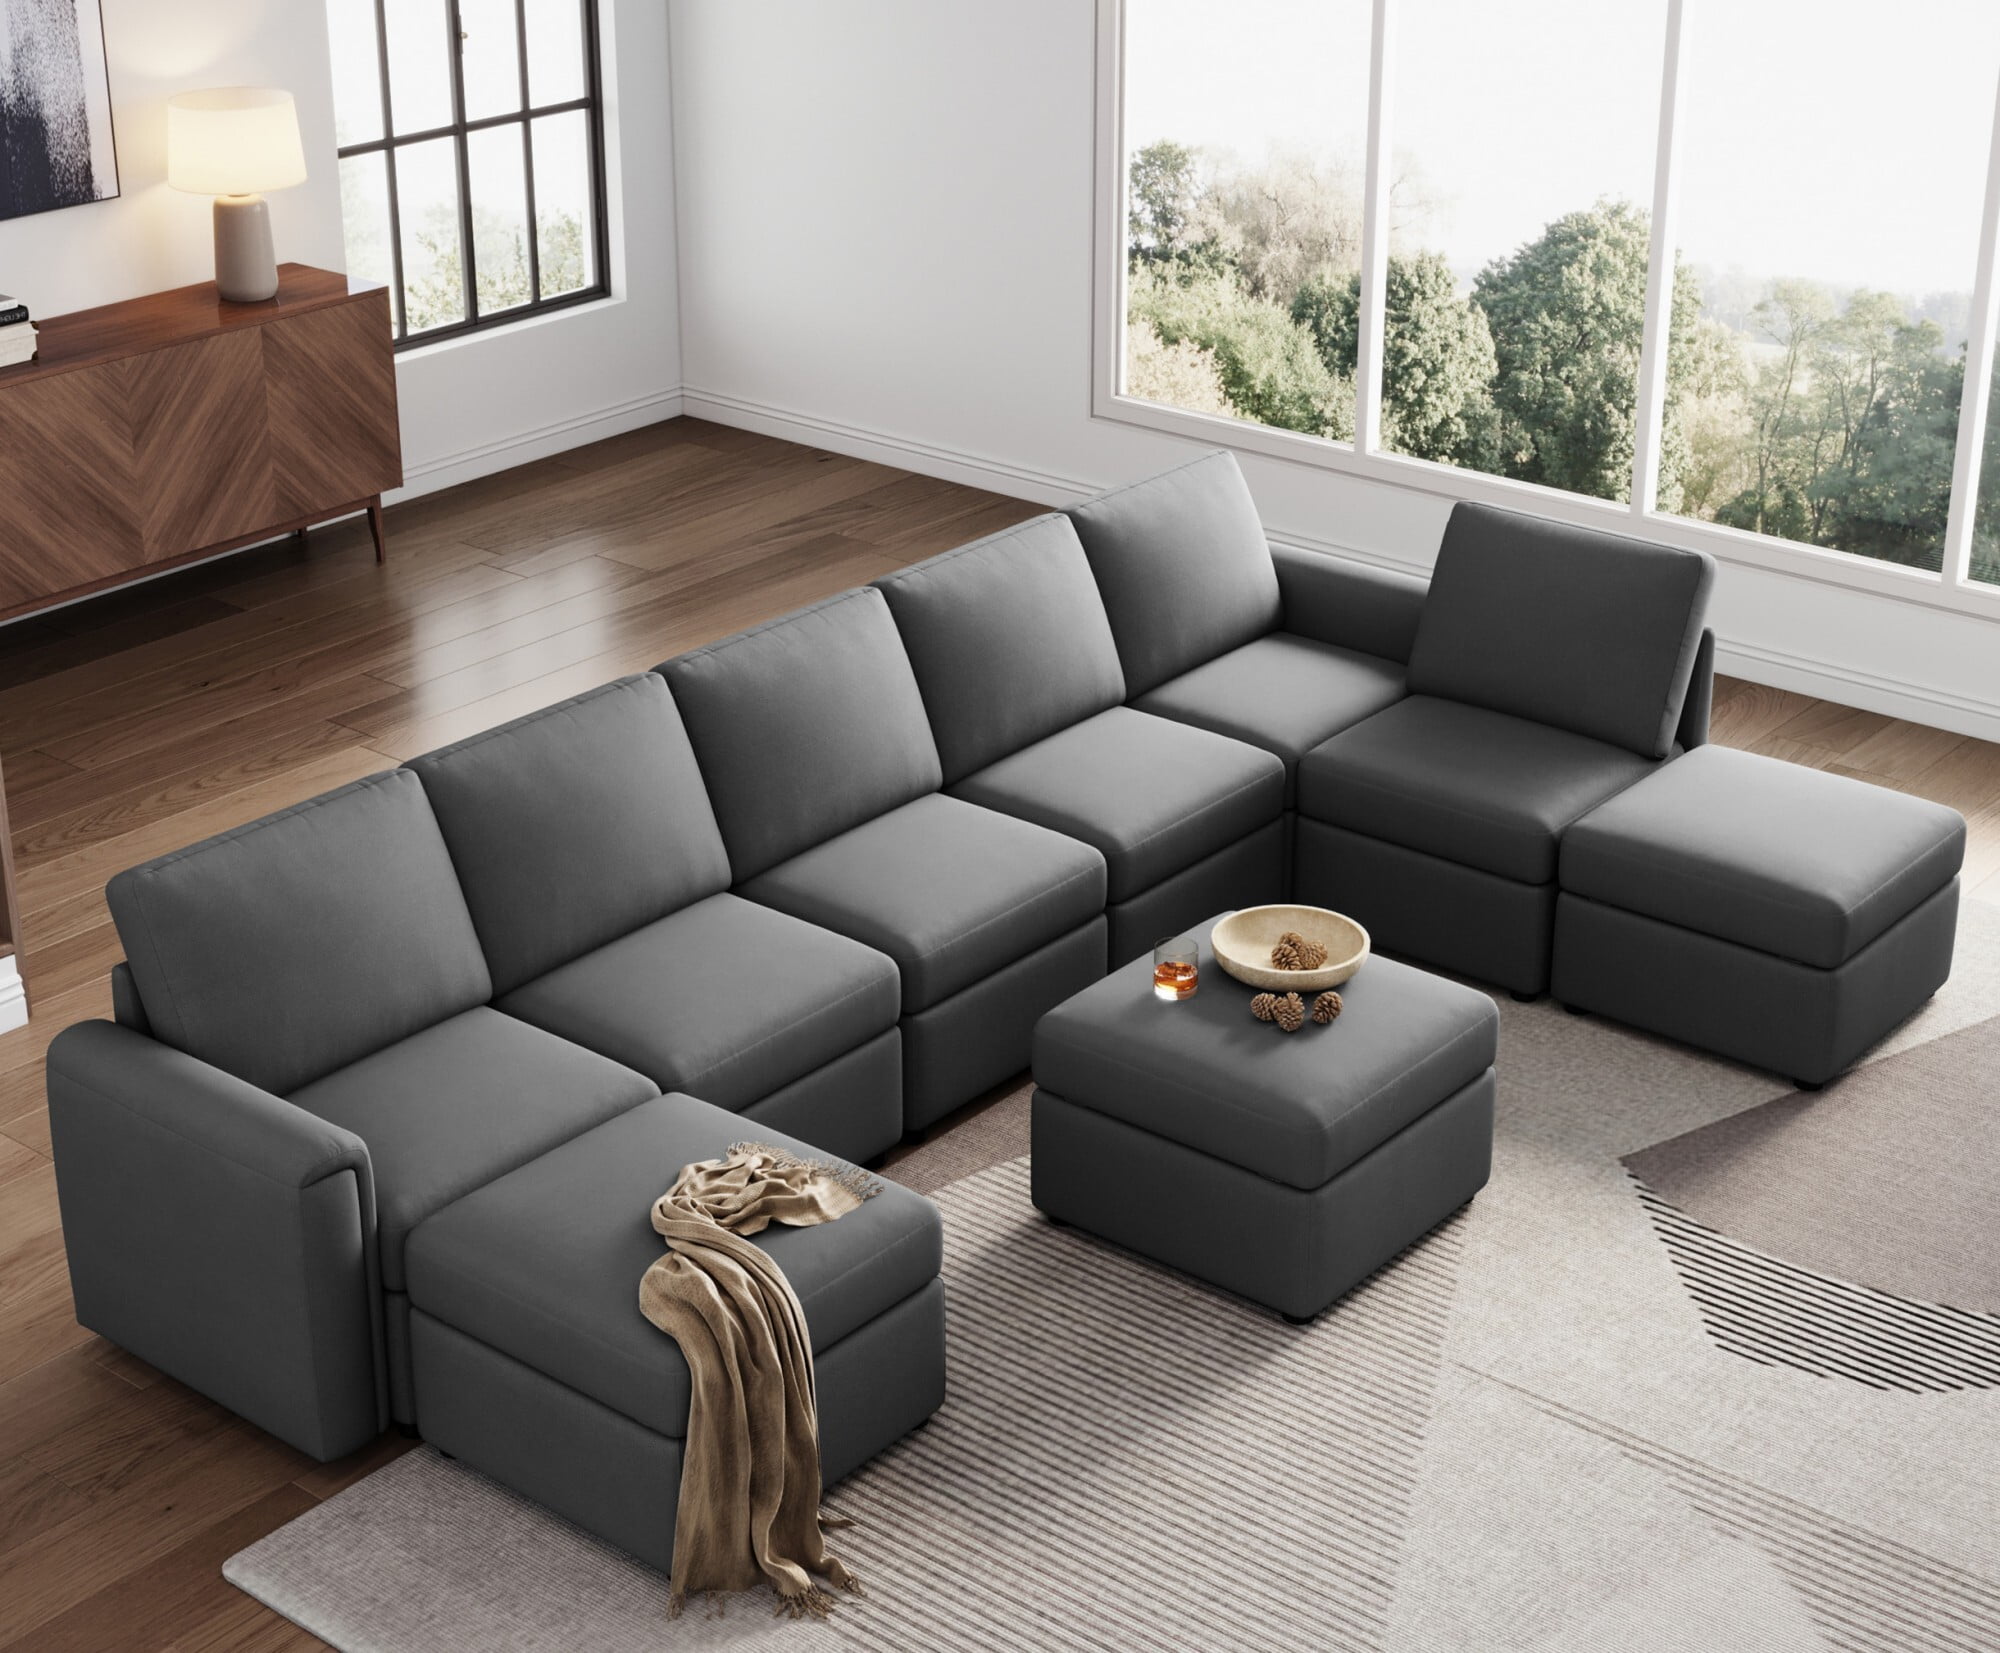 Oversized Modular Couch Sectional Sofa